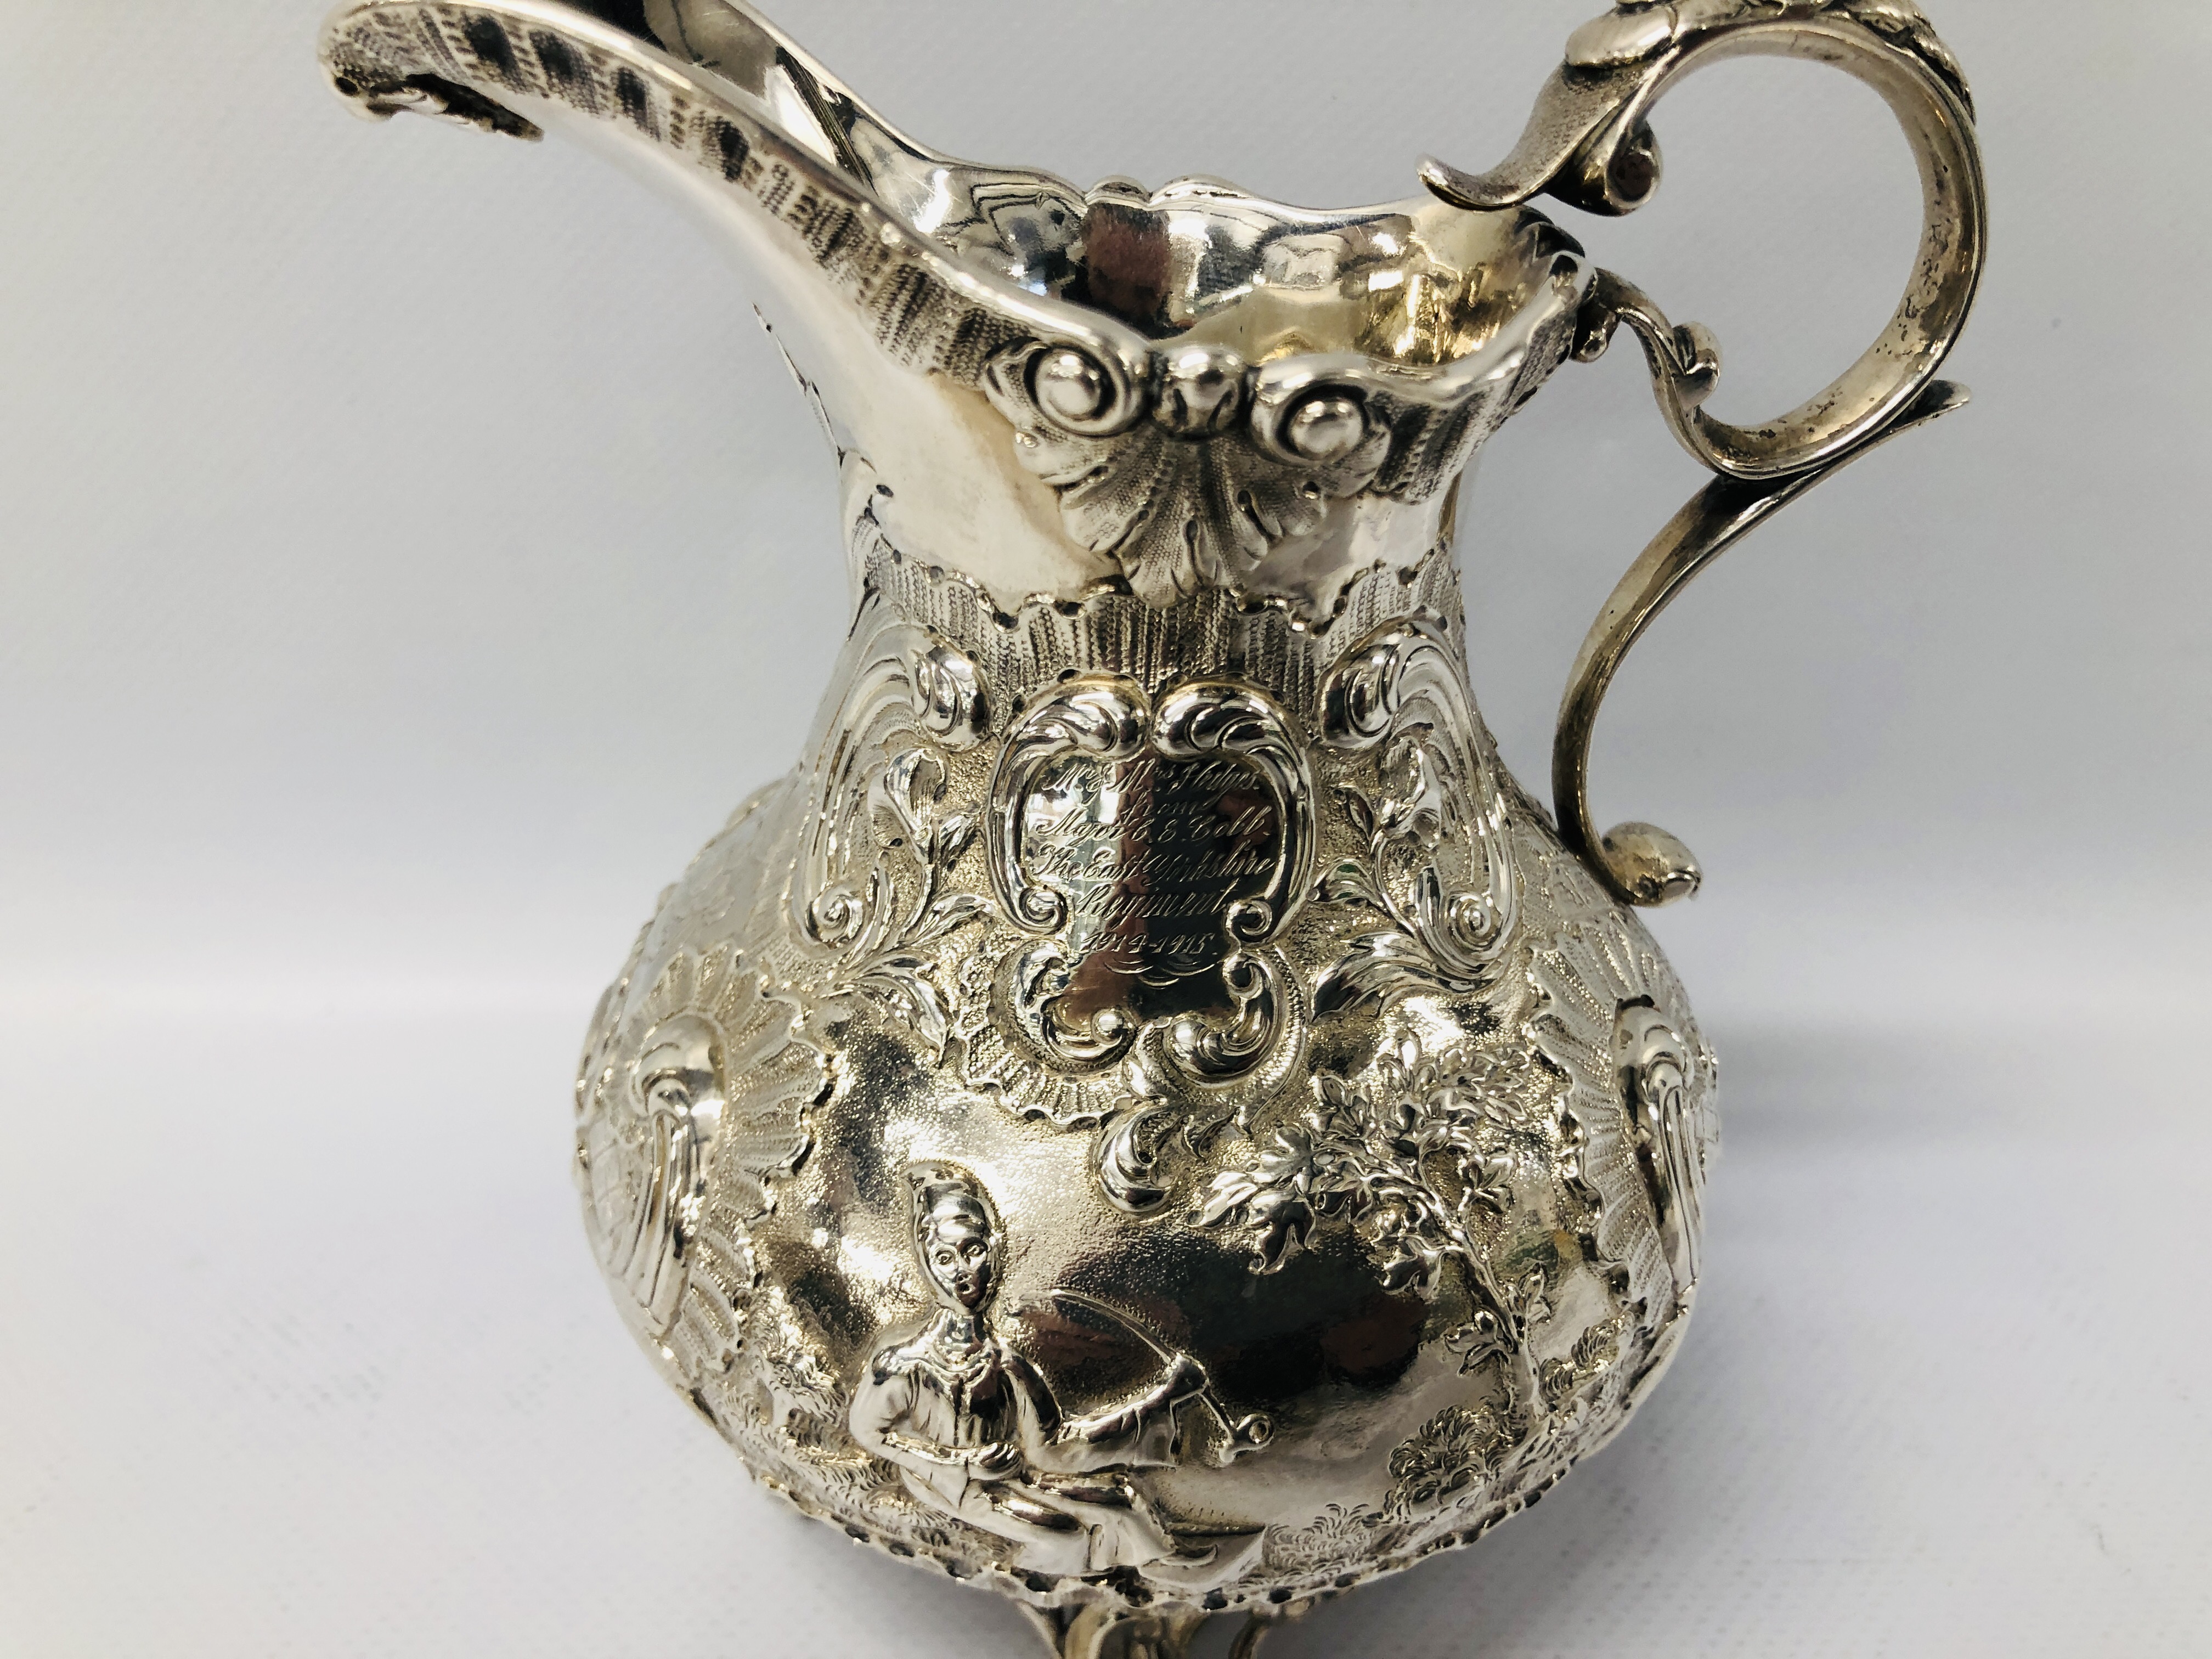 A SILVER MILK JUG OF ROCOCO DESIGN DECORATED WITH CHINOISERIE FIGURES WITH INSCRIPTION MR AND MRS J. - Image 4 of 25